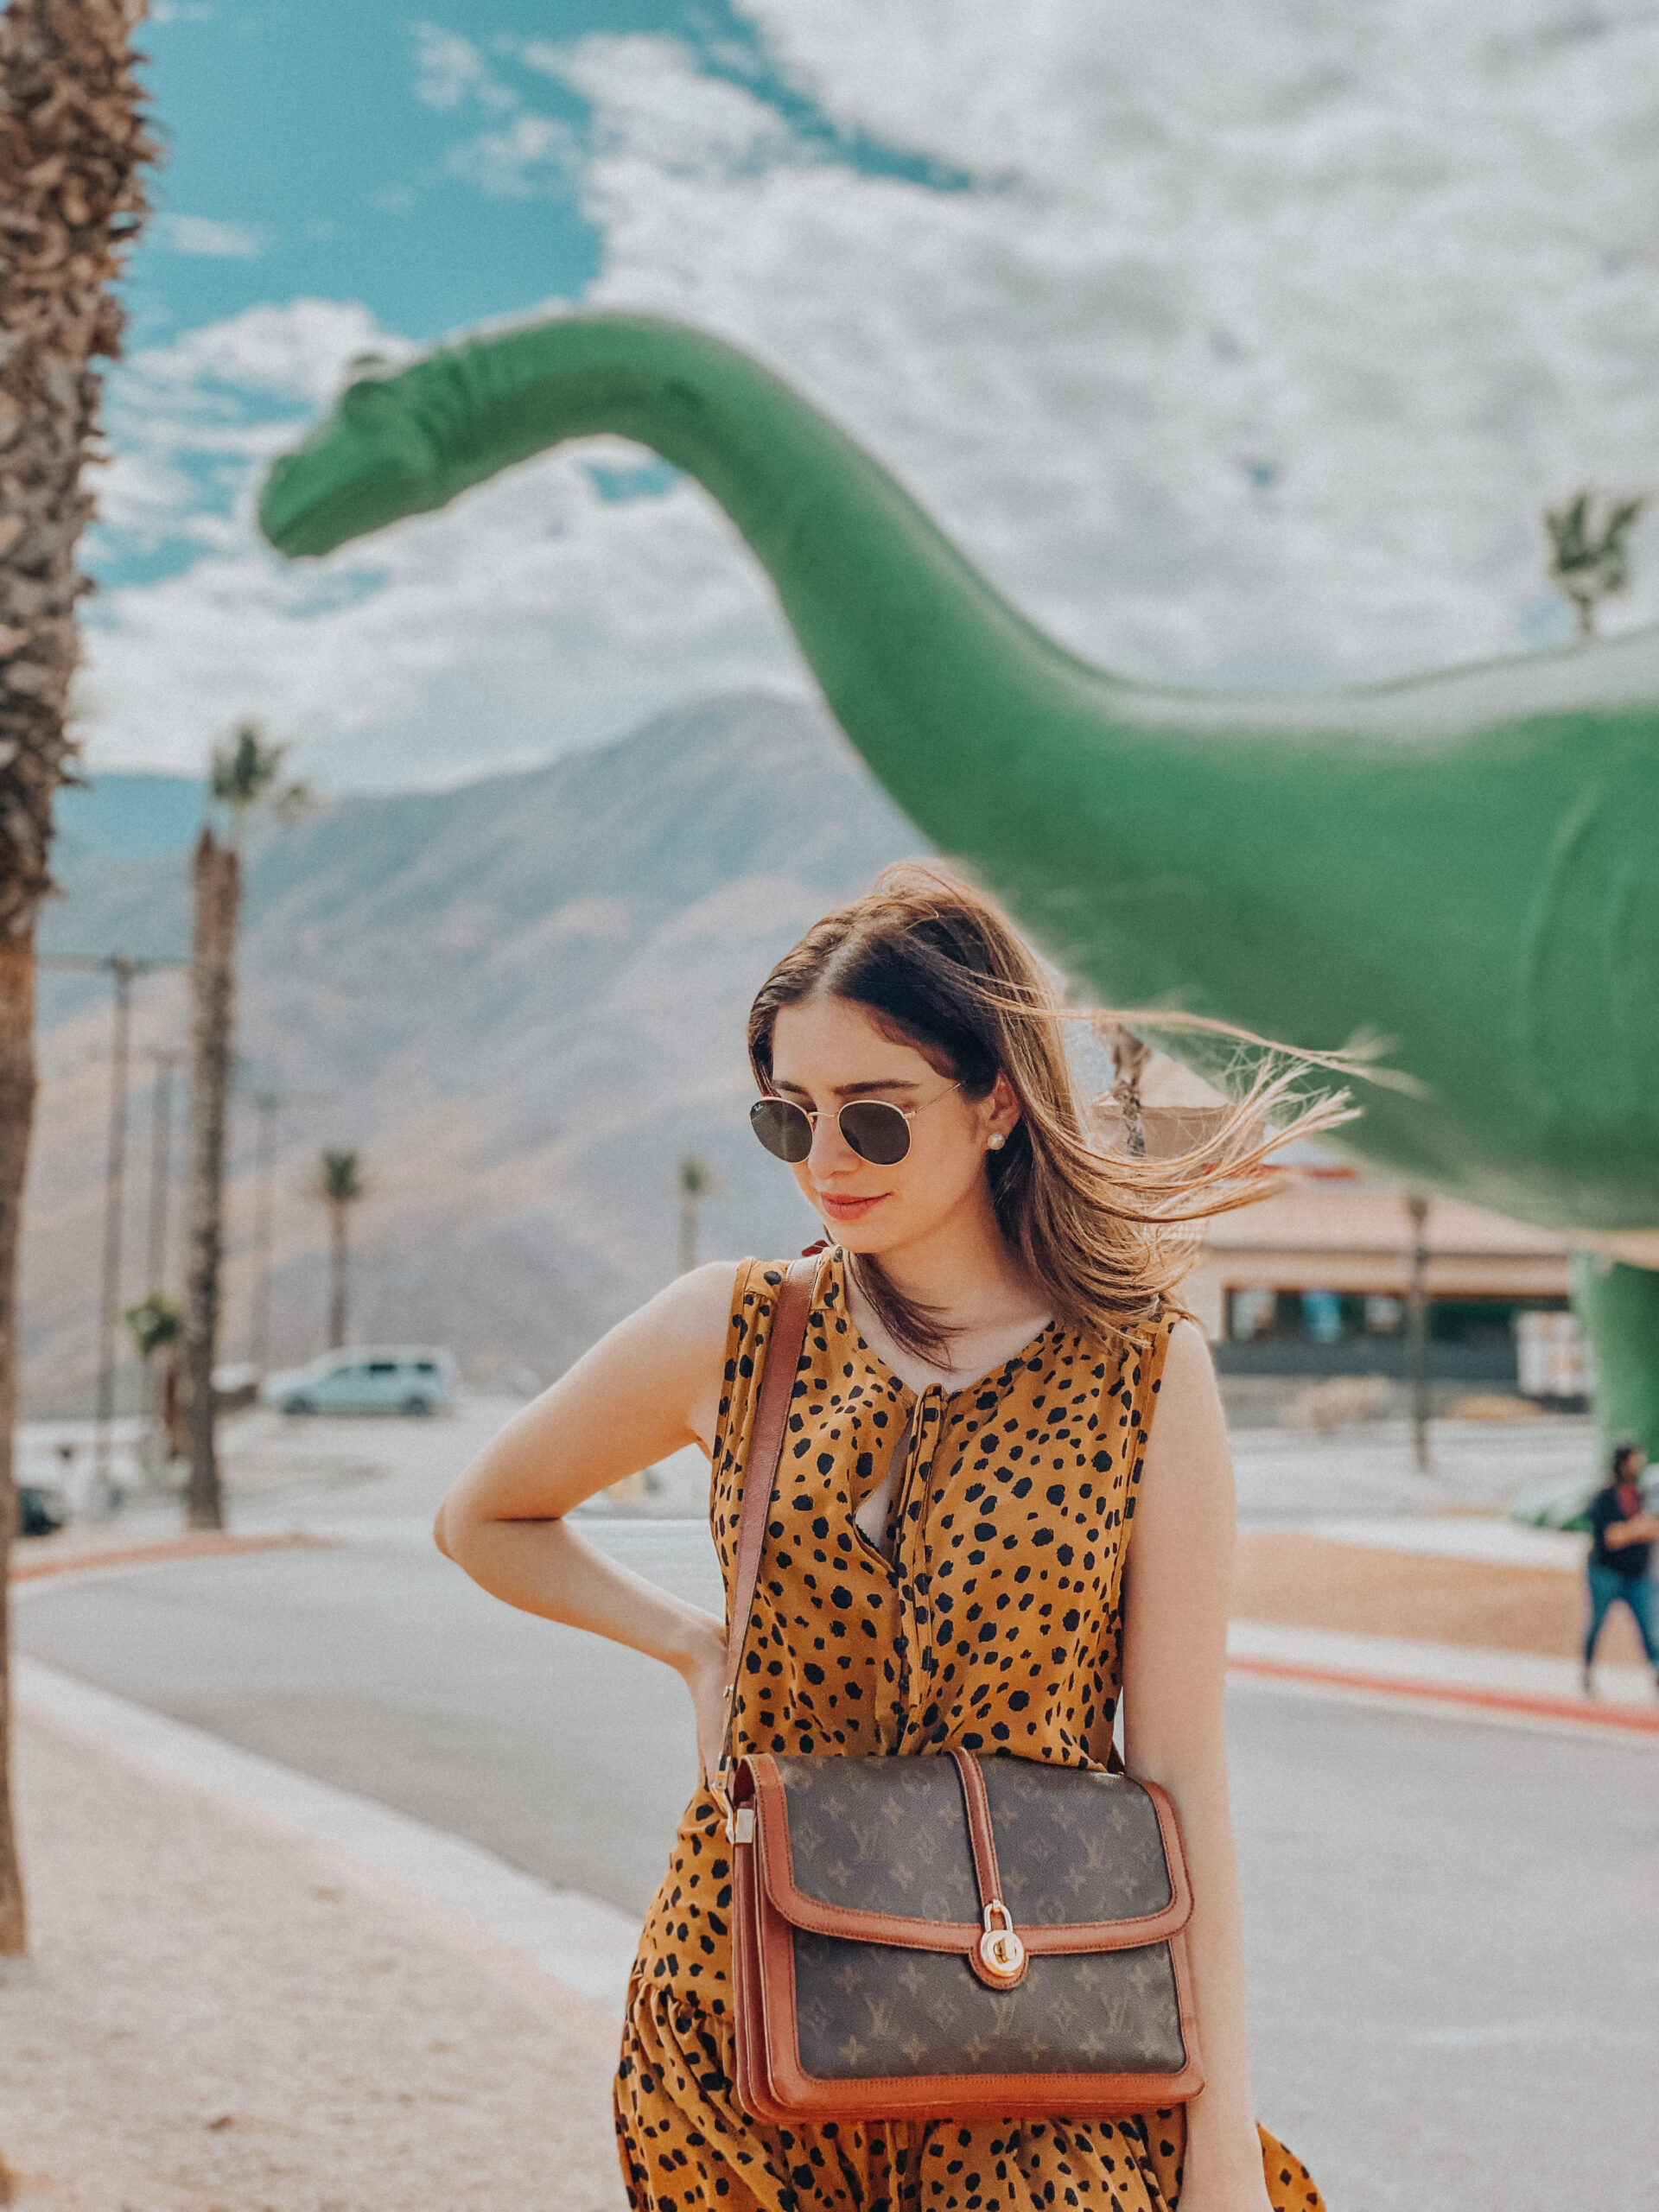 Cabazon Dinosaurs Palm Springs, things to do in Palm Springs, weekend in Palm Springs - Palm Trees and Pellegrino California travel blog